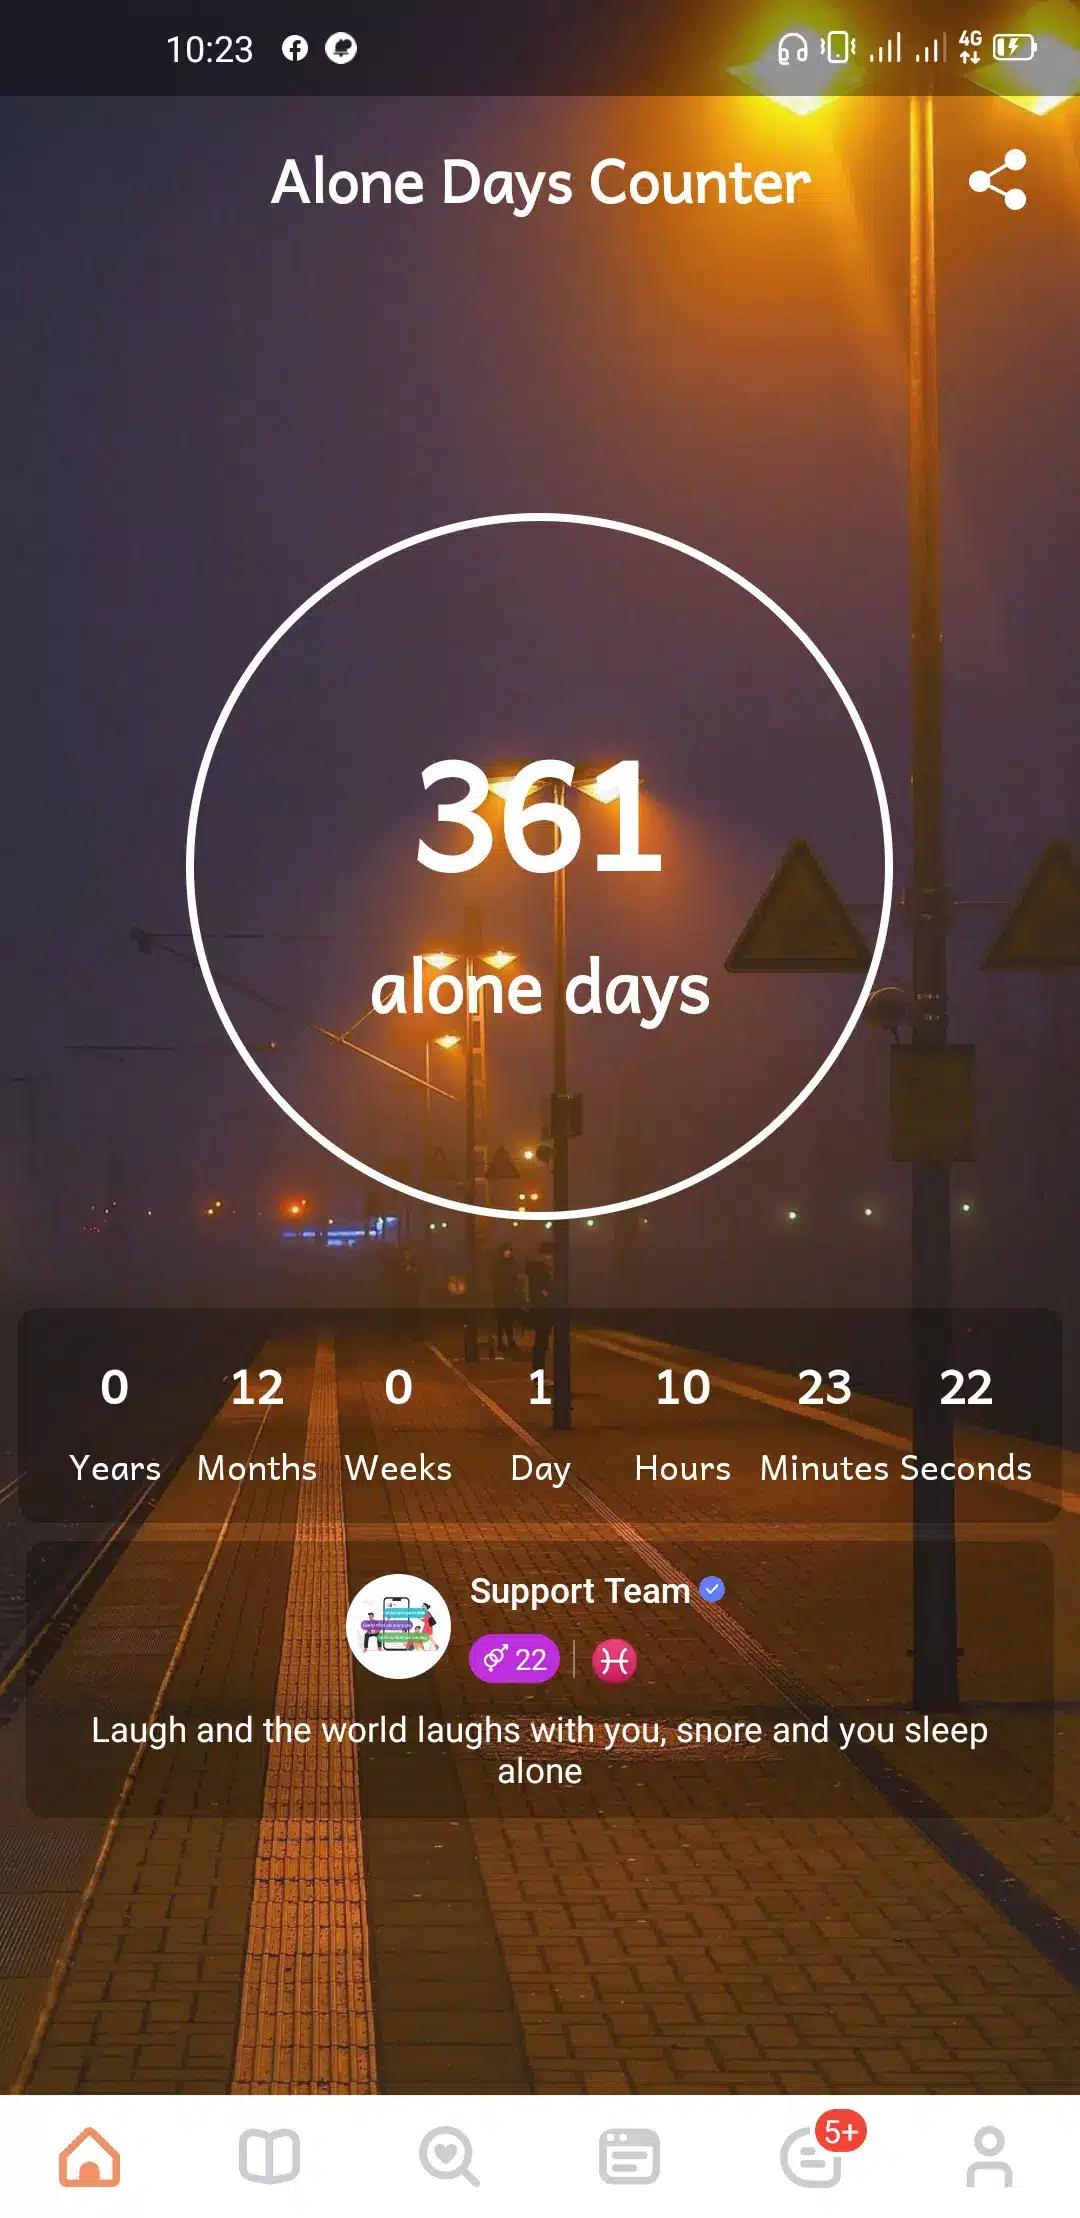 Alone Days Counter Image 1